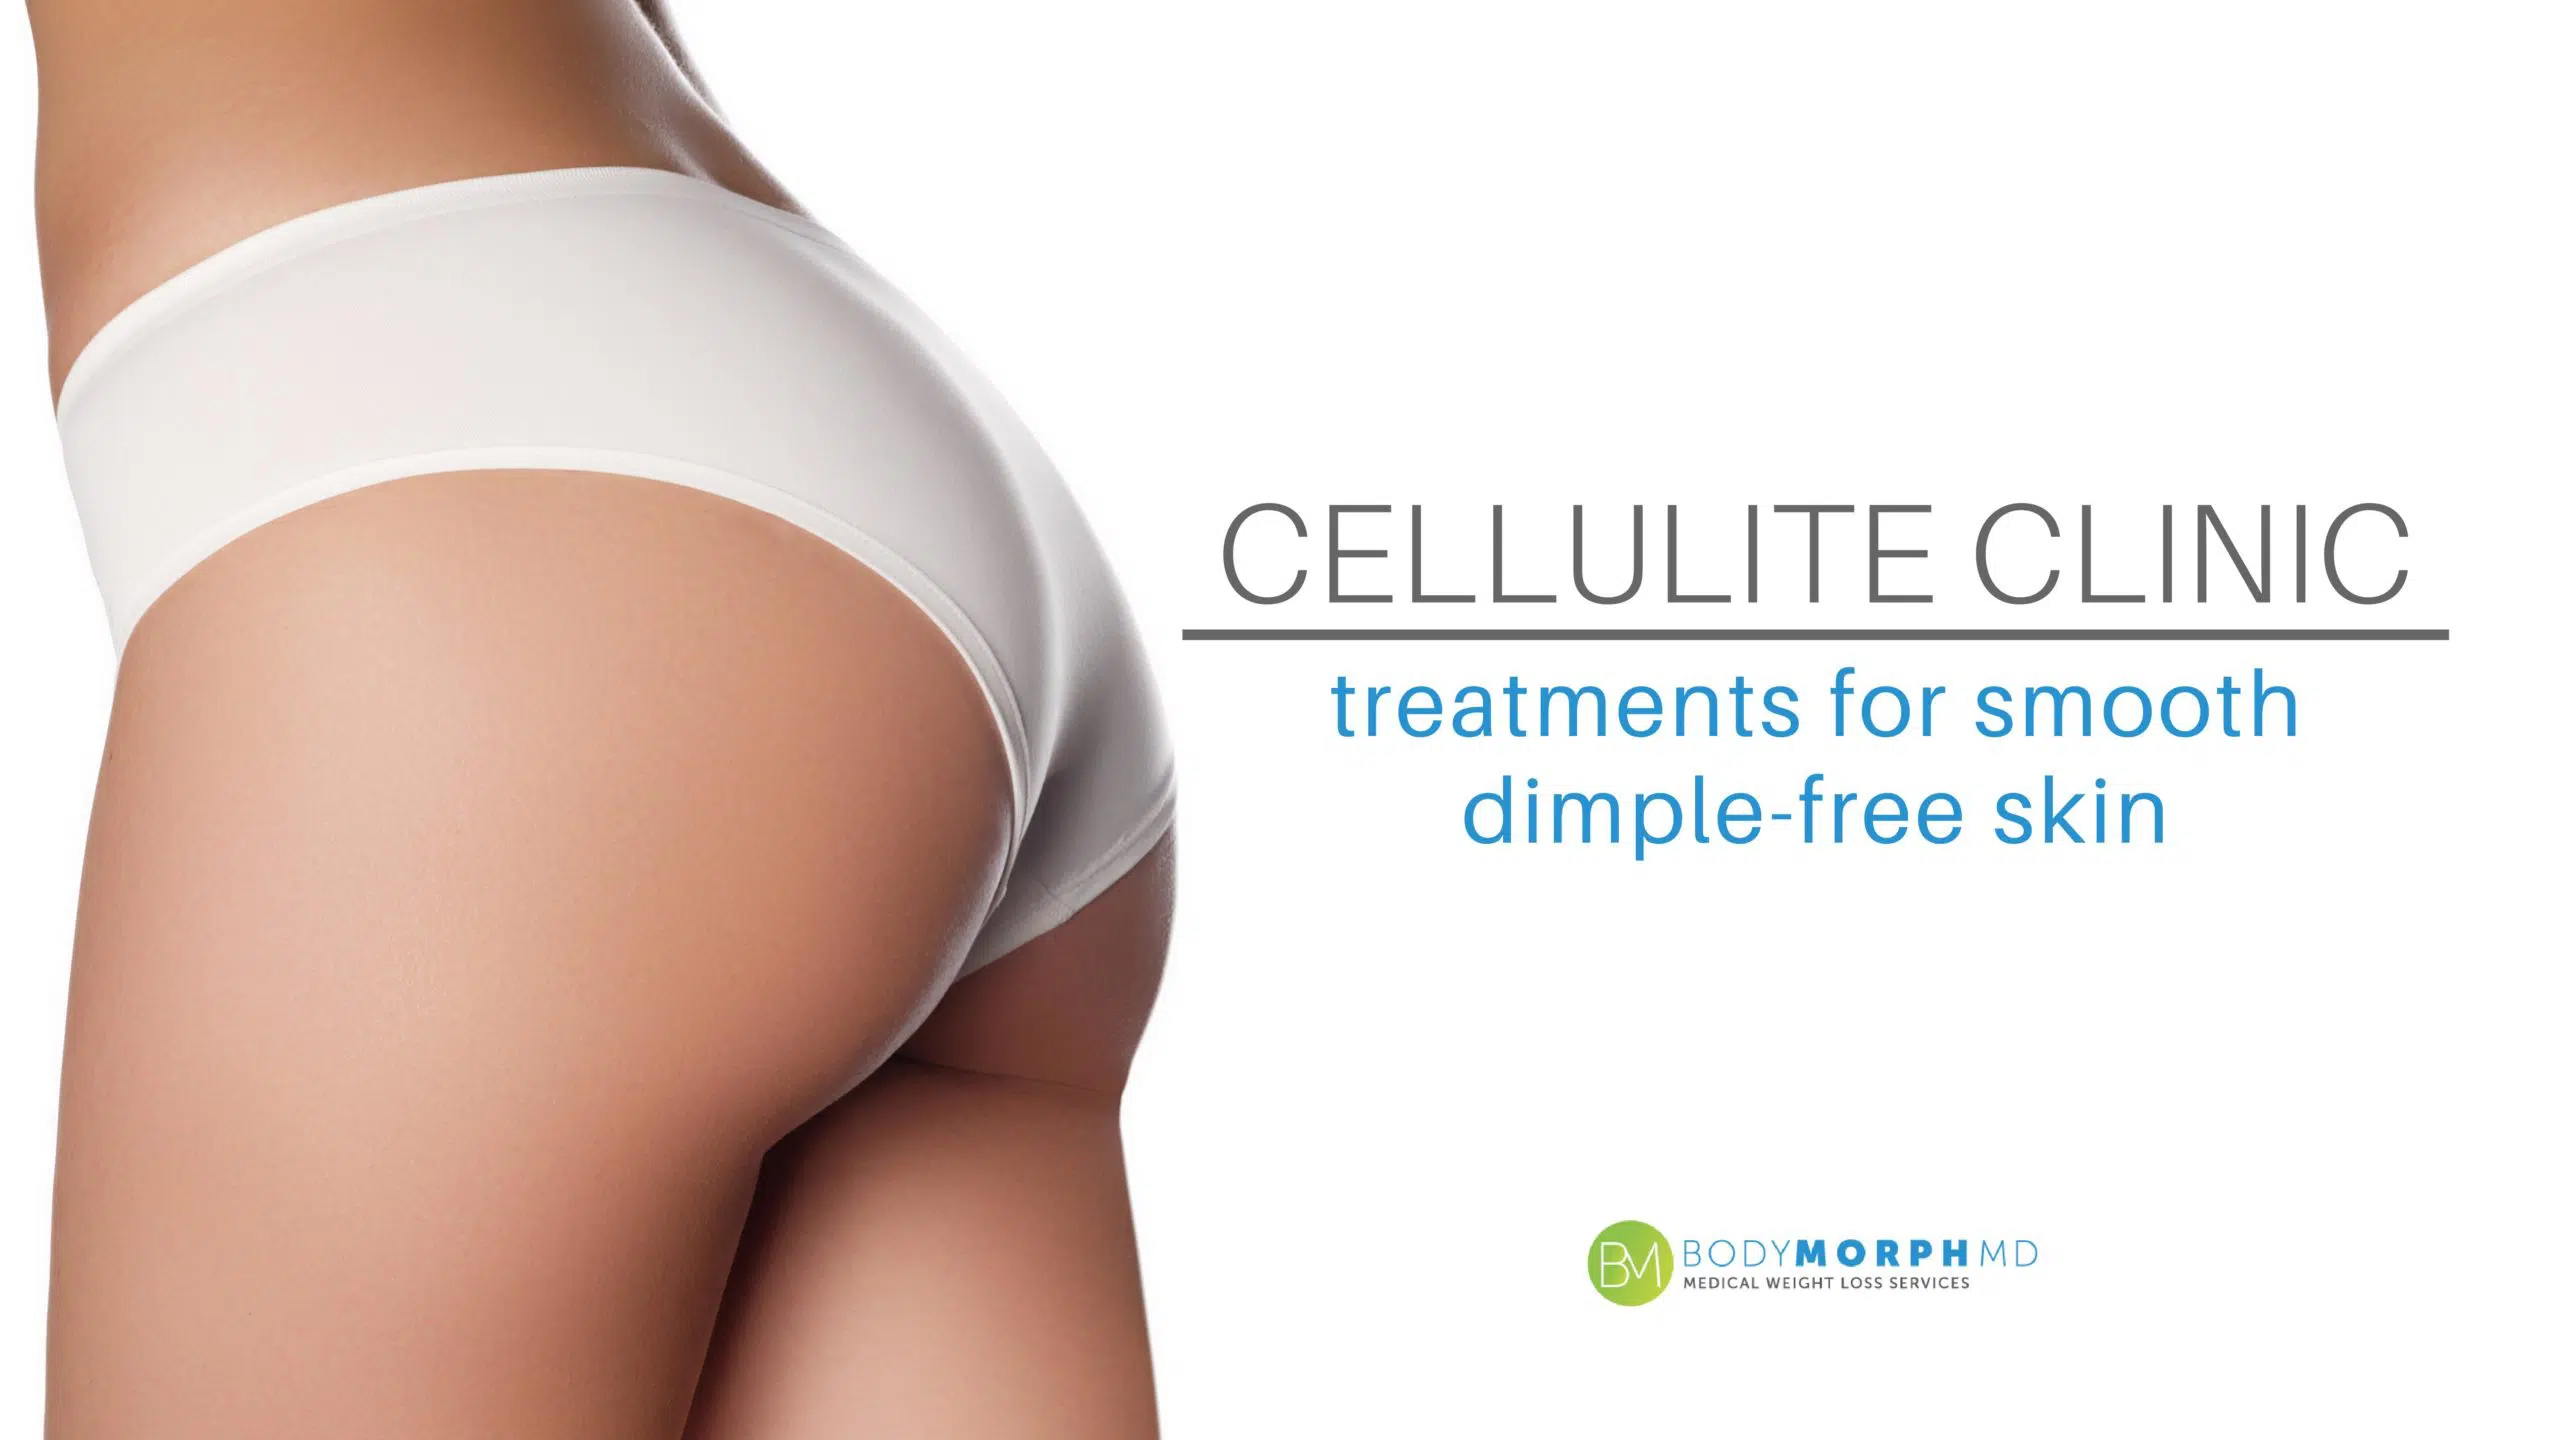 Cellulite Clinic at Body Morph MD